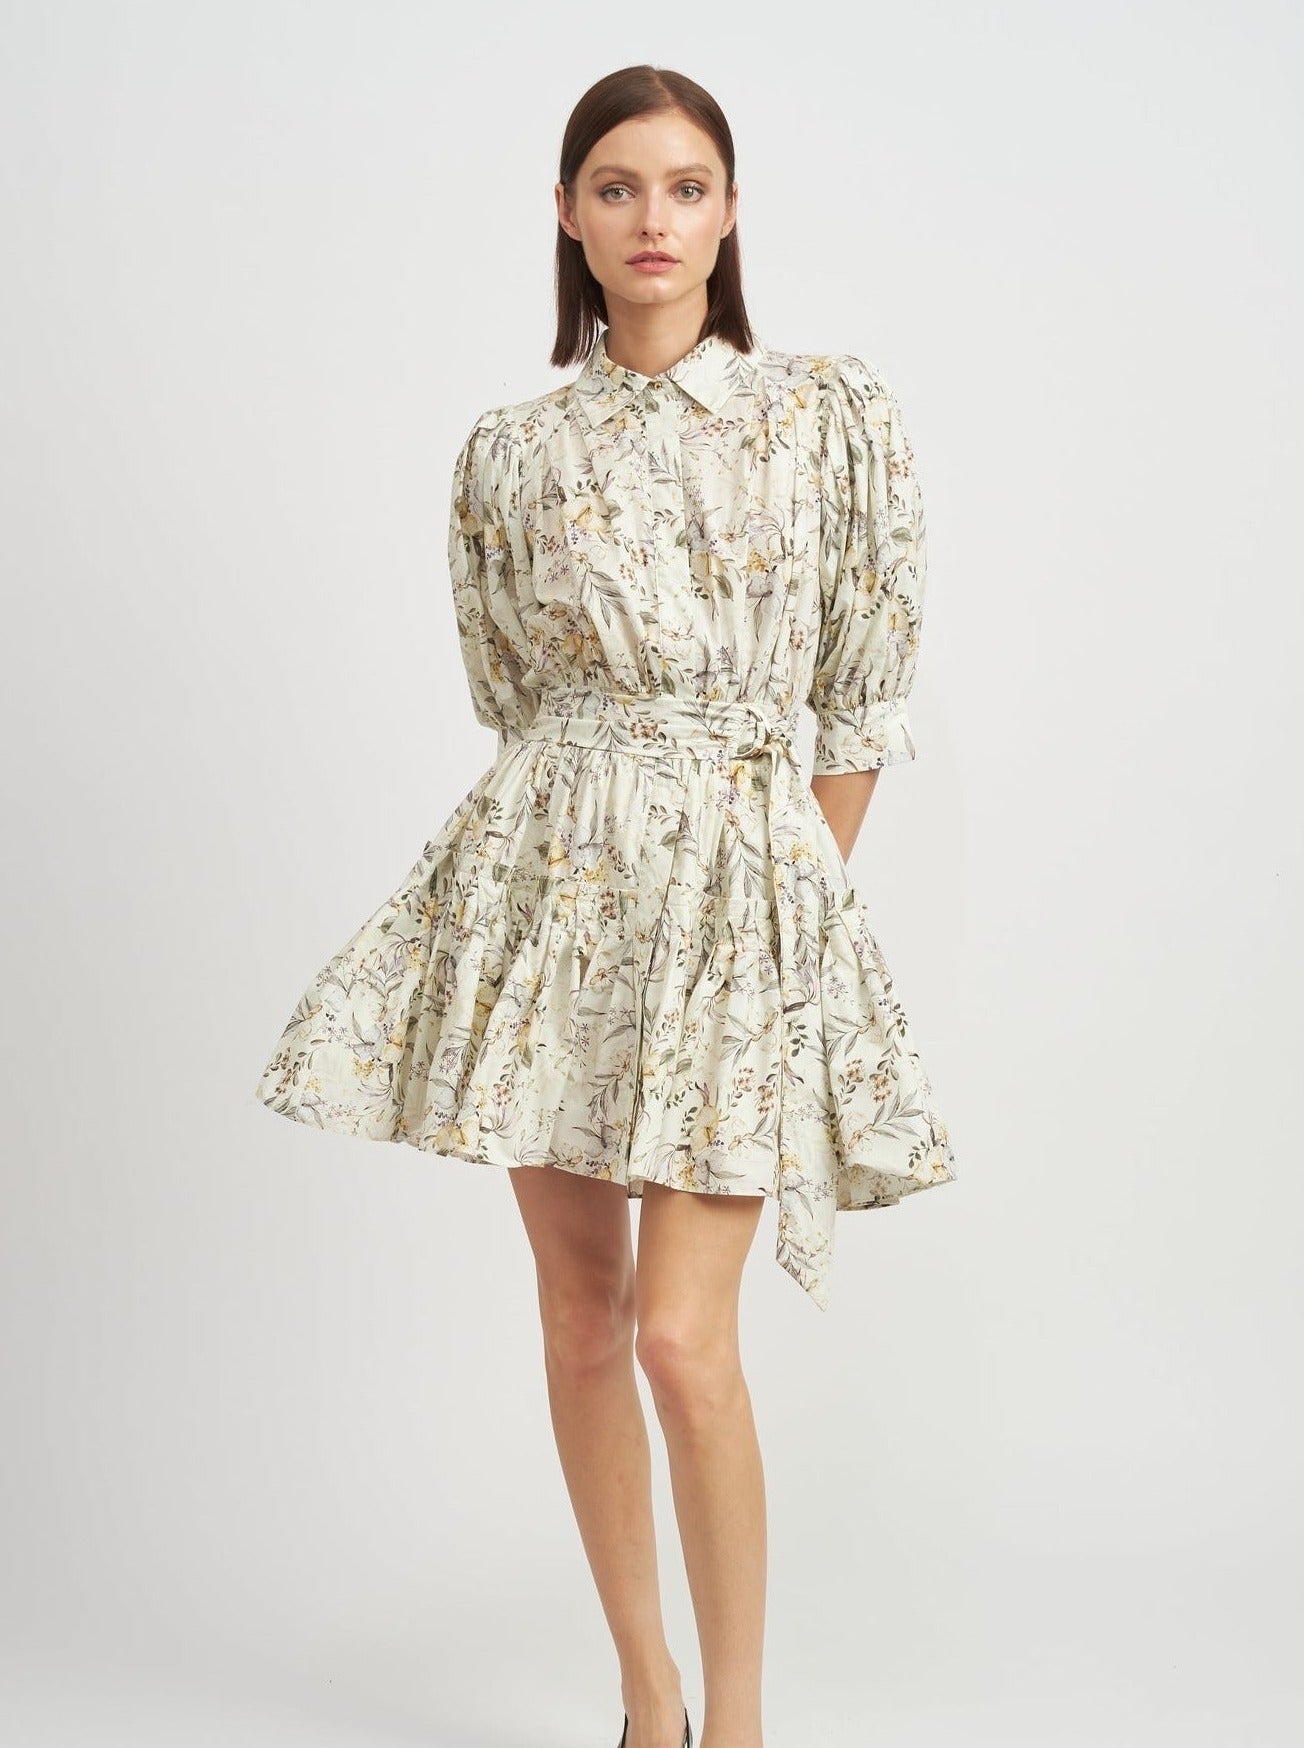 ivory mini dress with ruffle hem, collar and puff sleeves and tie at waist.  Ivory, green and yellow floral